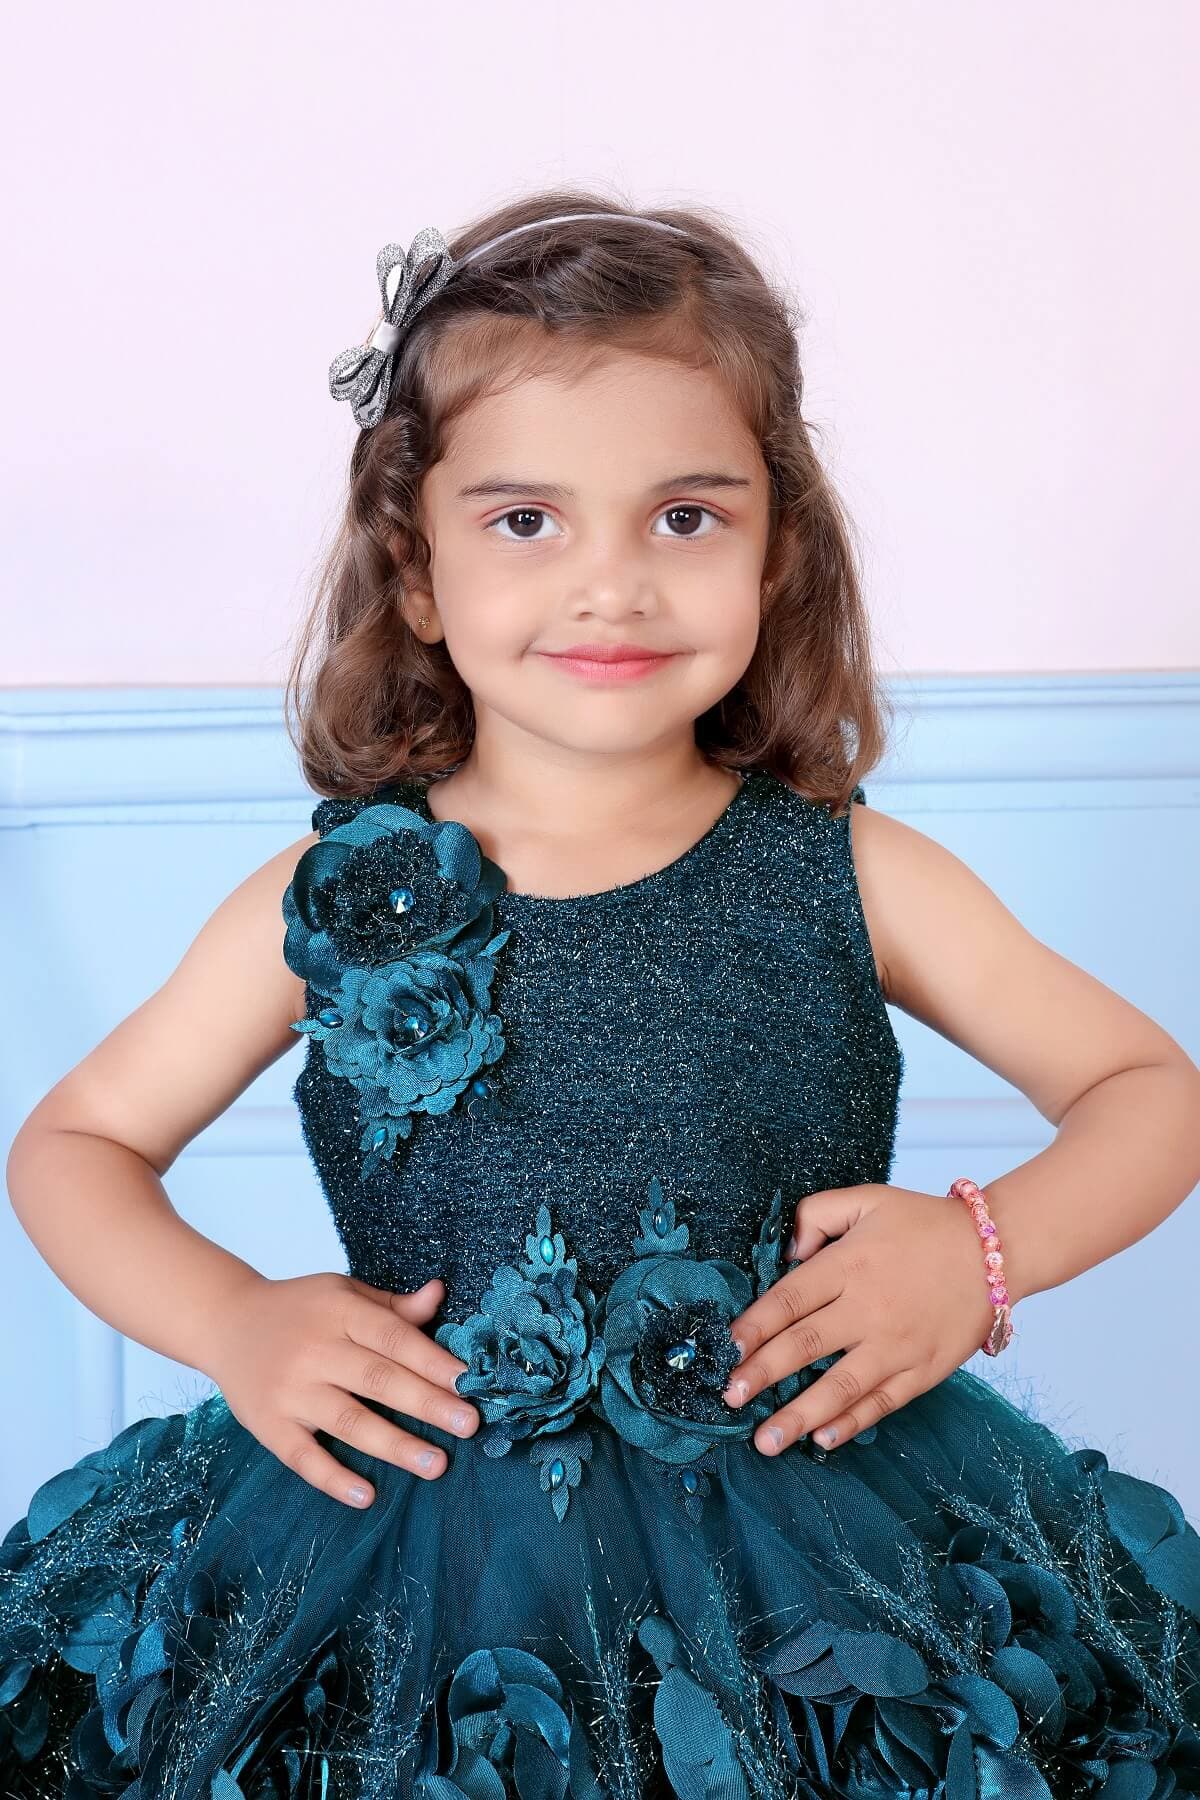 Childbird Teal Green Color Flower Girl's Party Dress